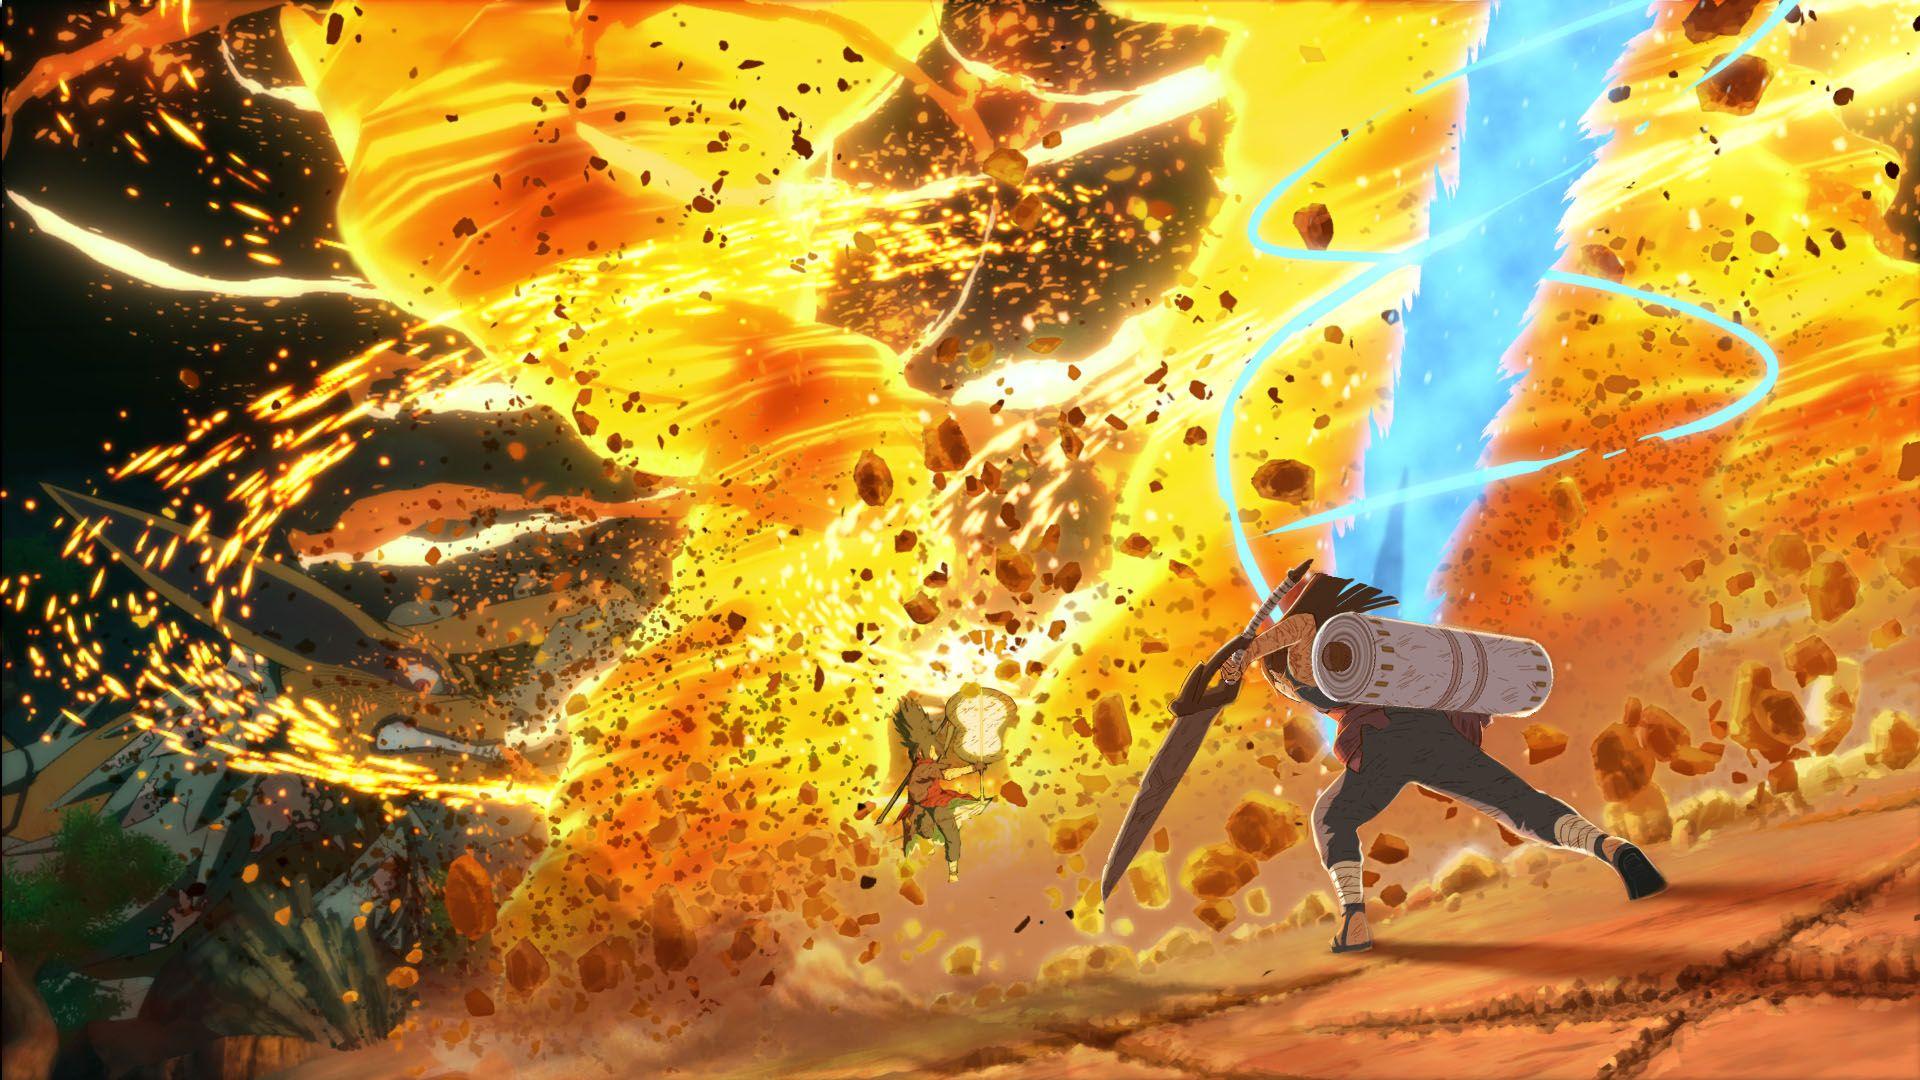 Going Hands On With Naruto Shippuden: Ultimate Ninja Storm 4